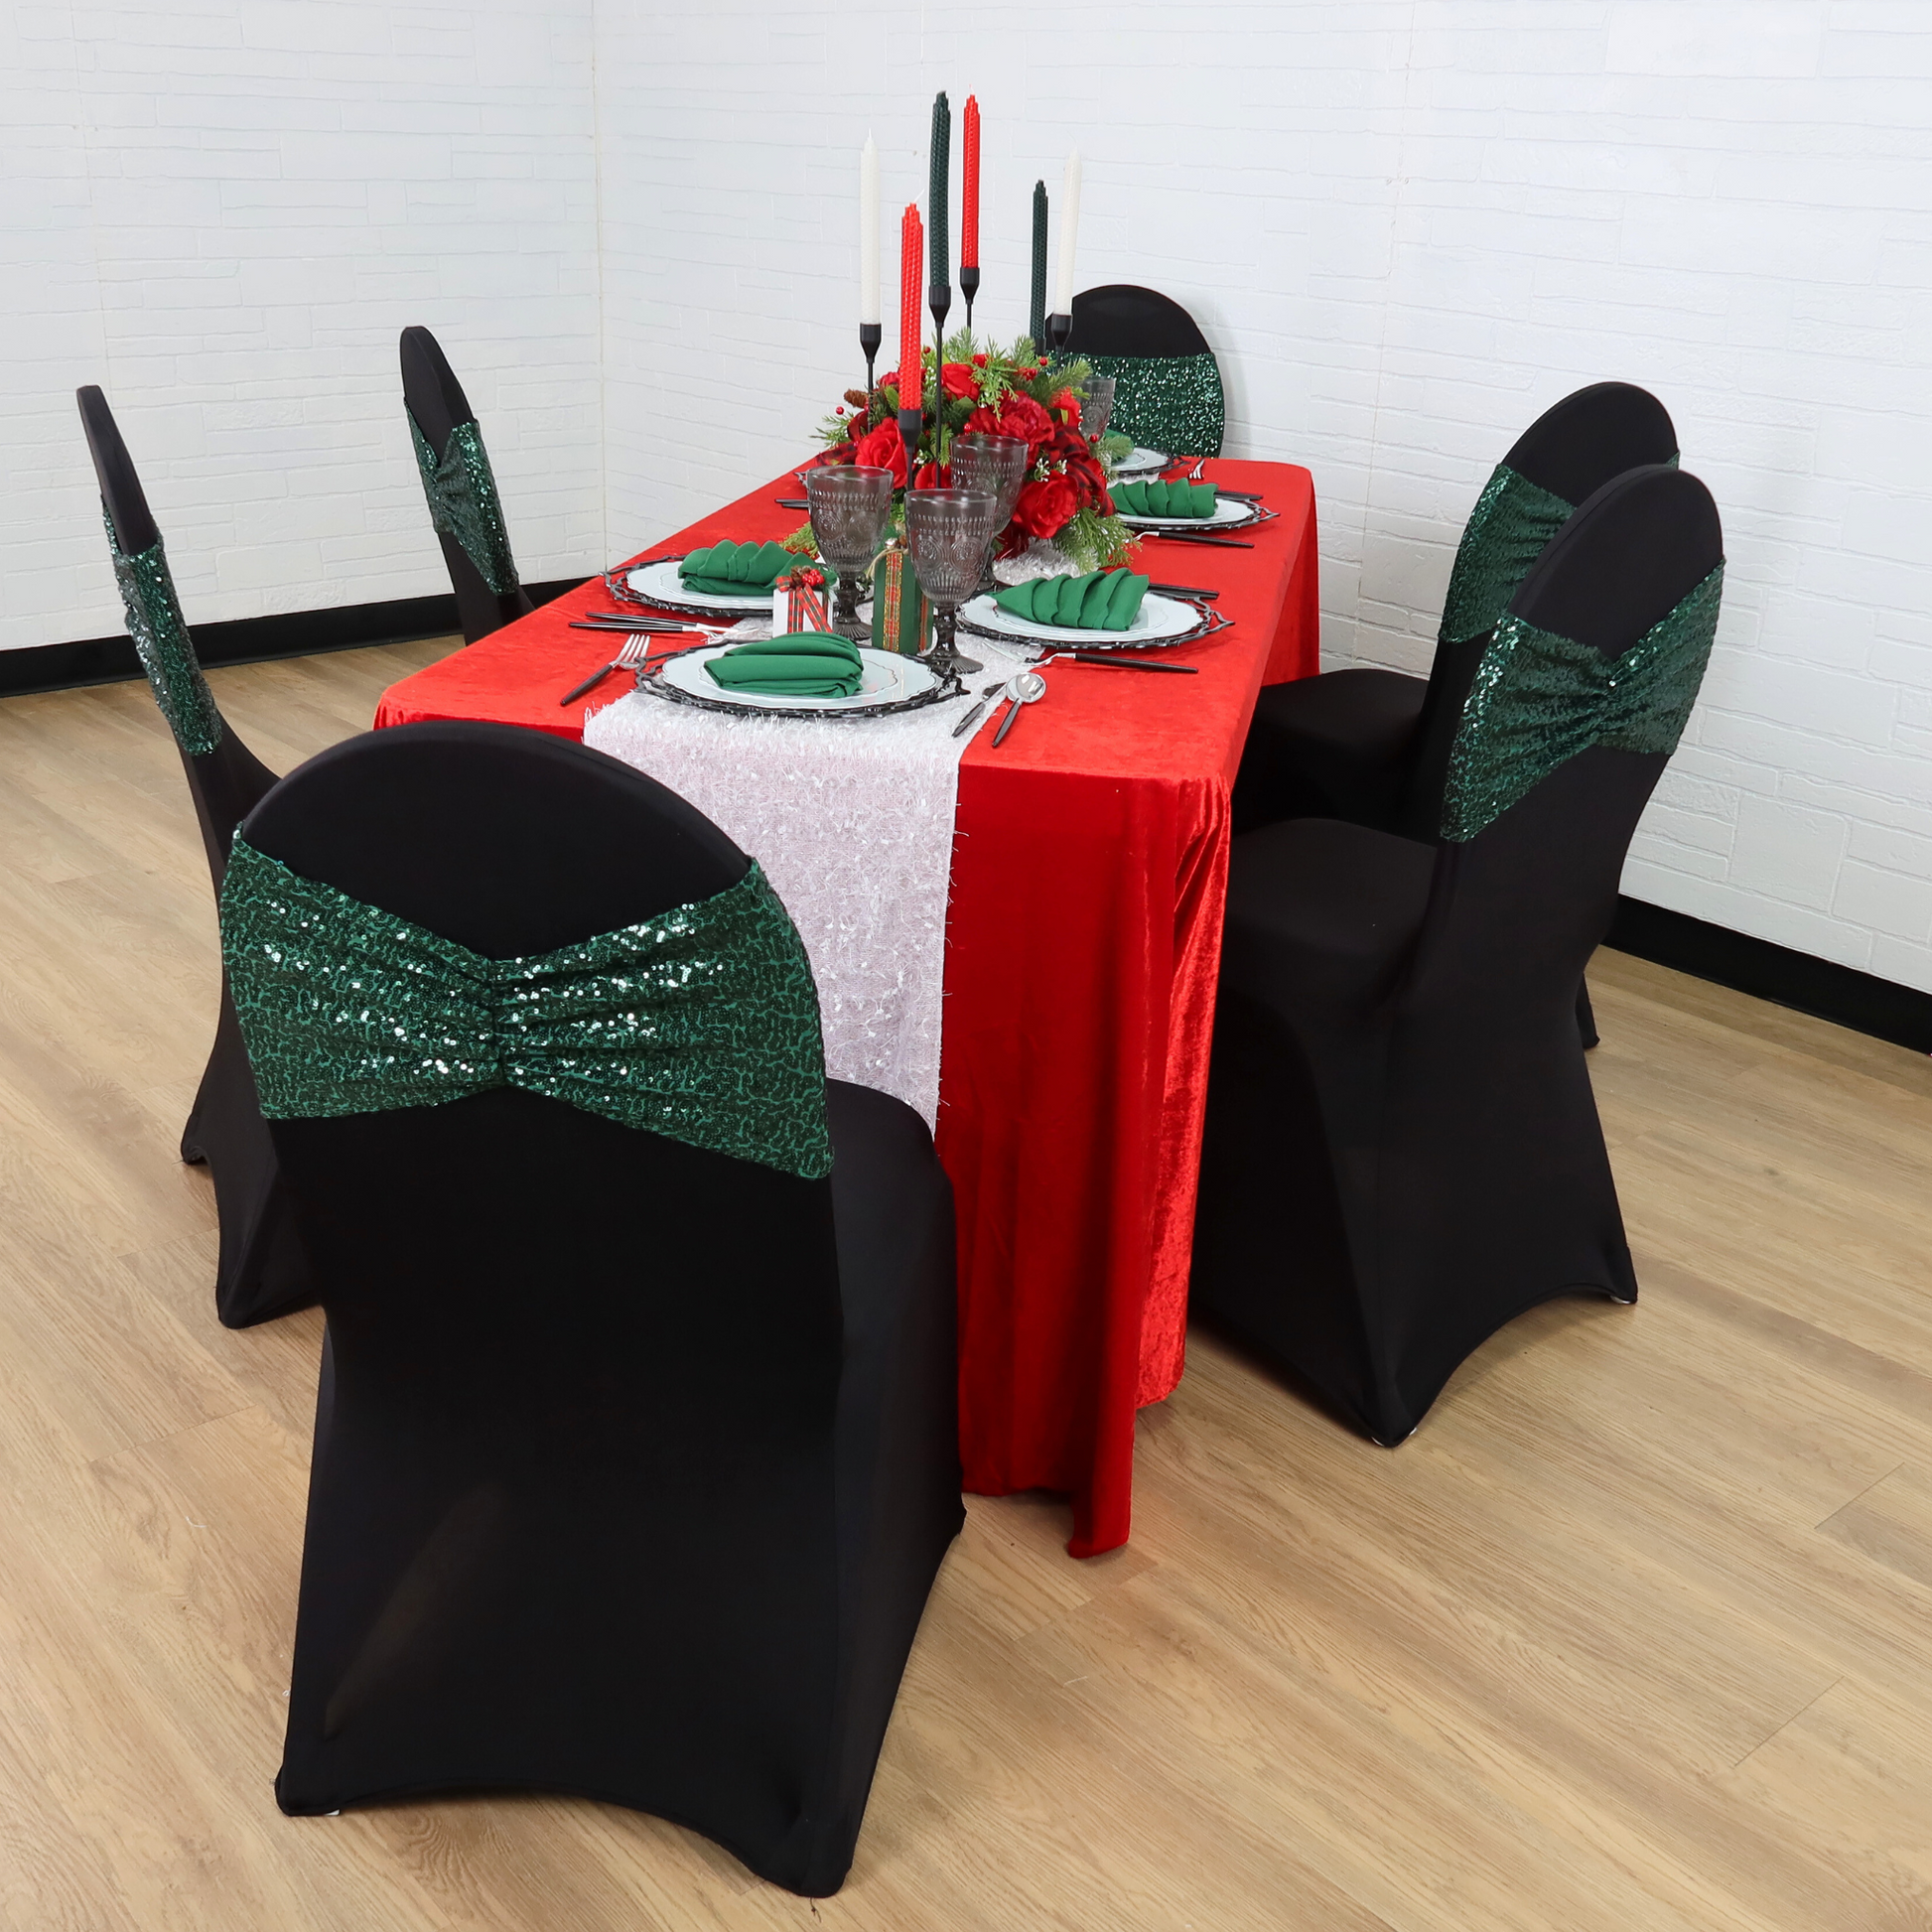 Premium Photo  Guests table setting for banquet in black red and